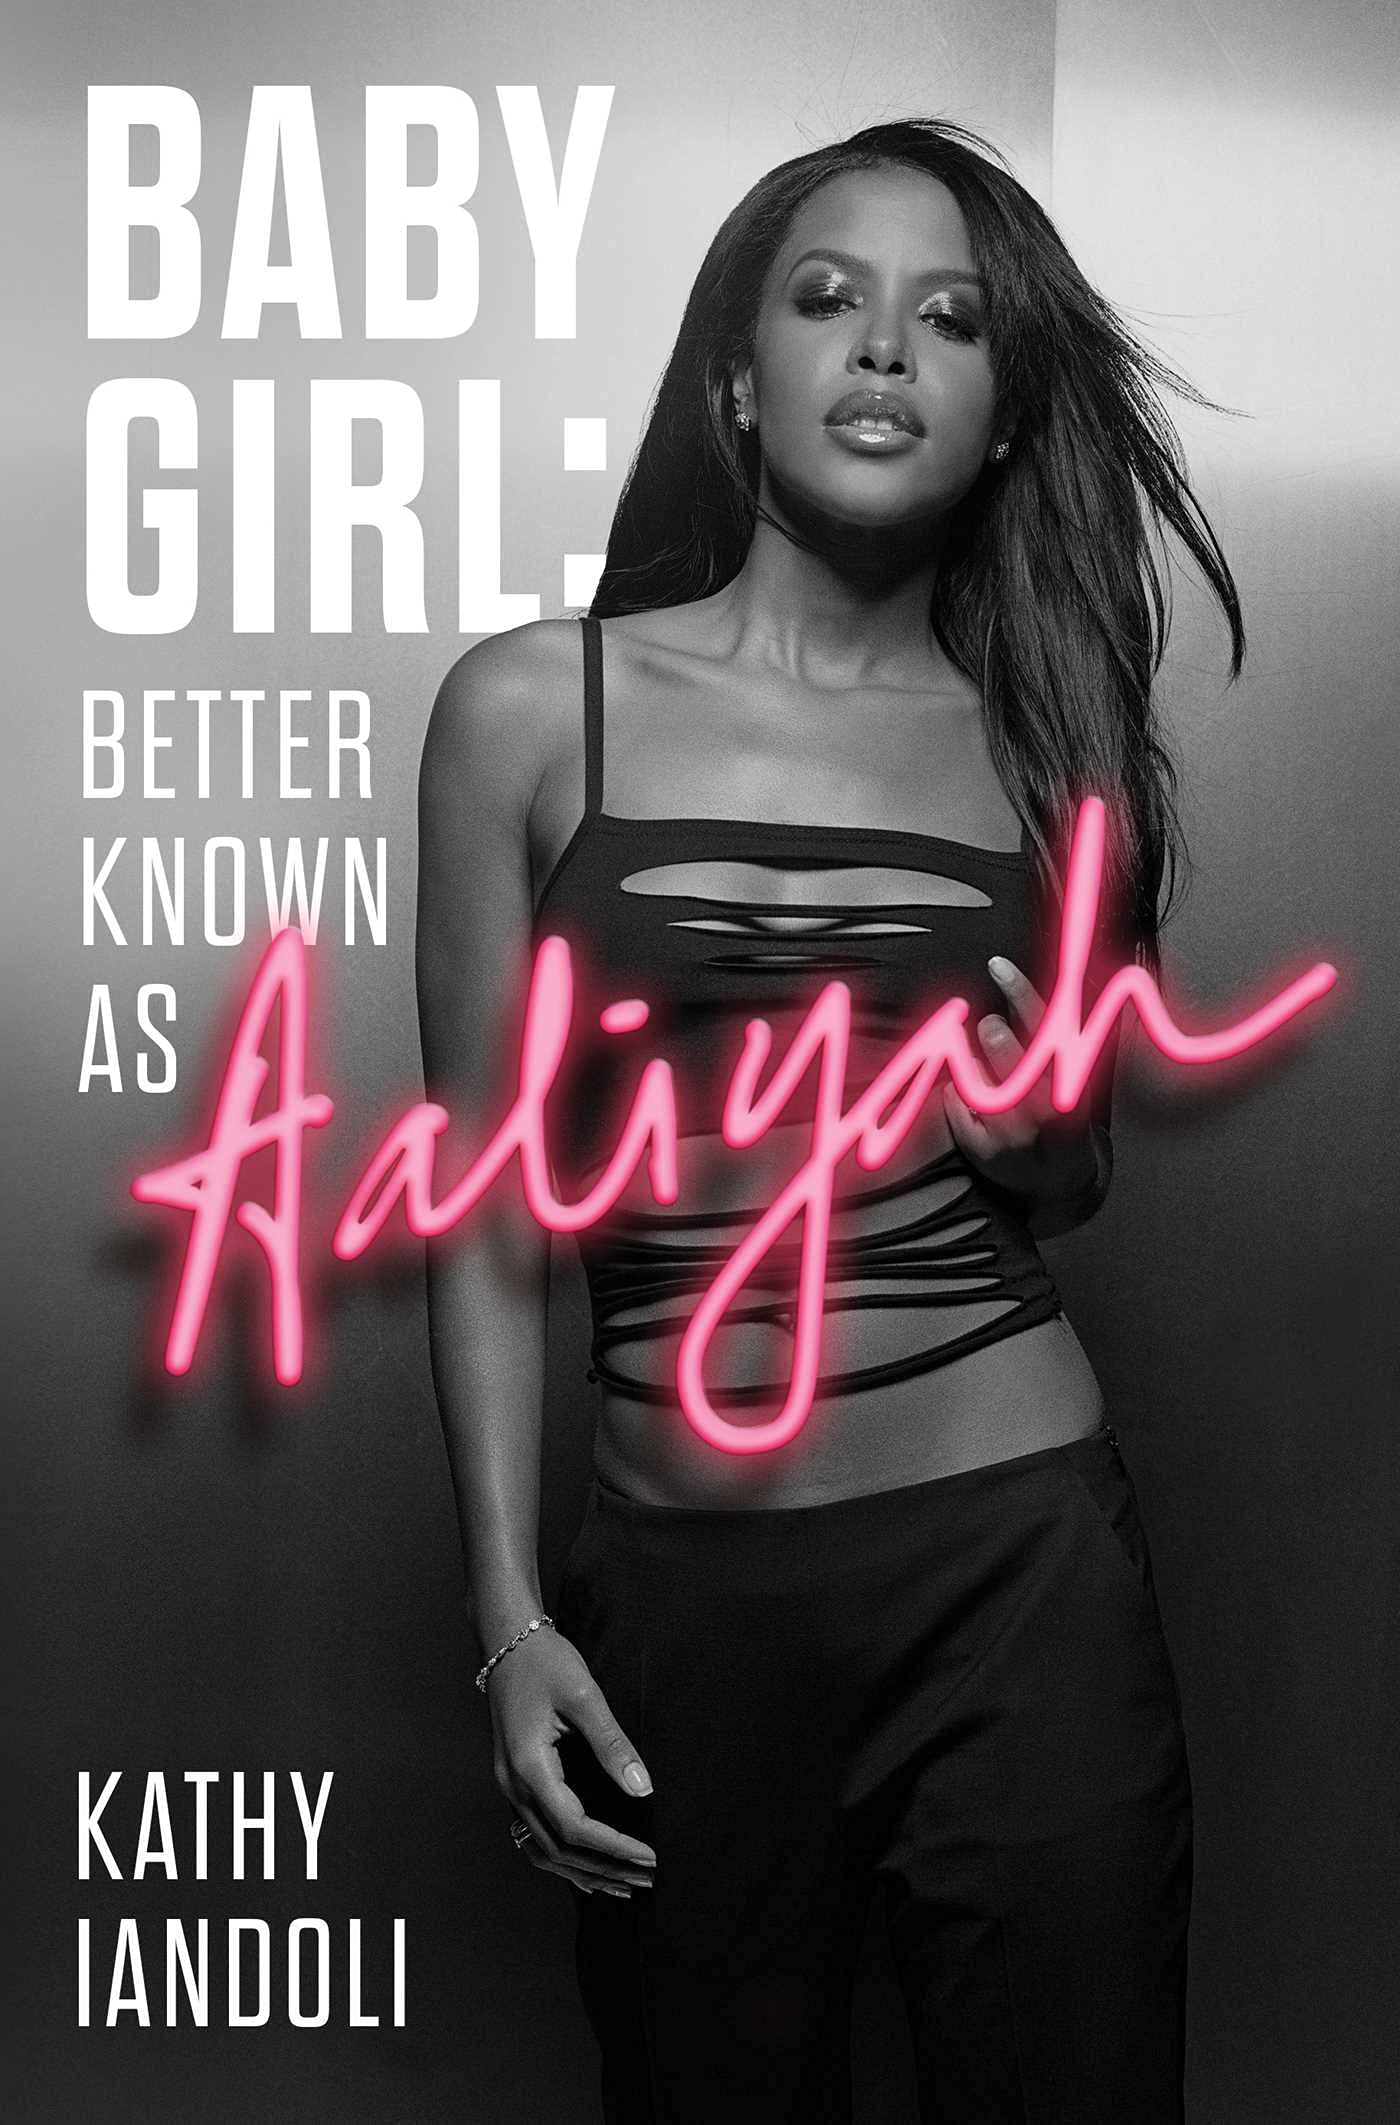 Baby Girl // Better Known as Aaliyah